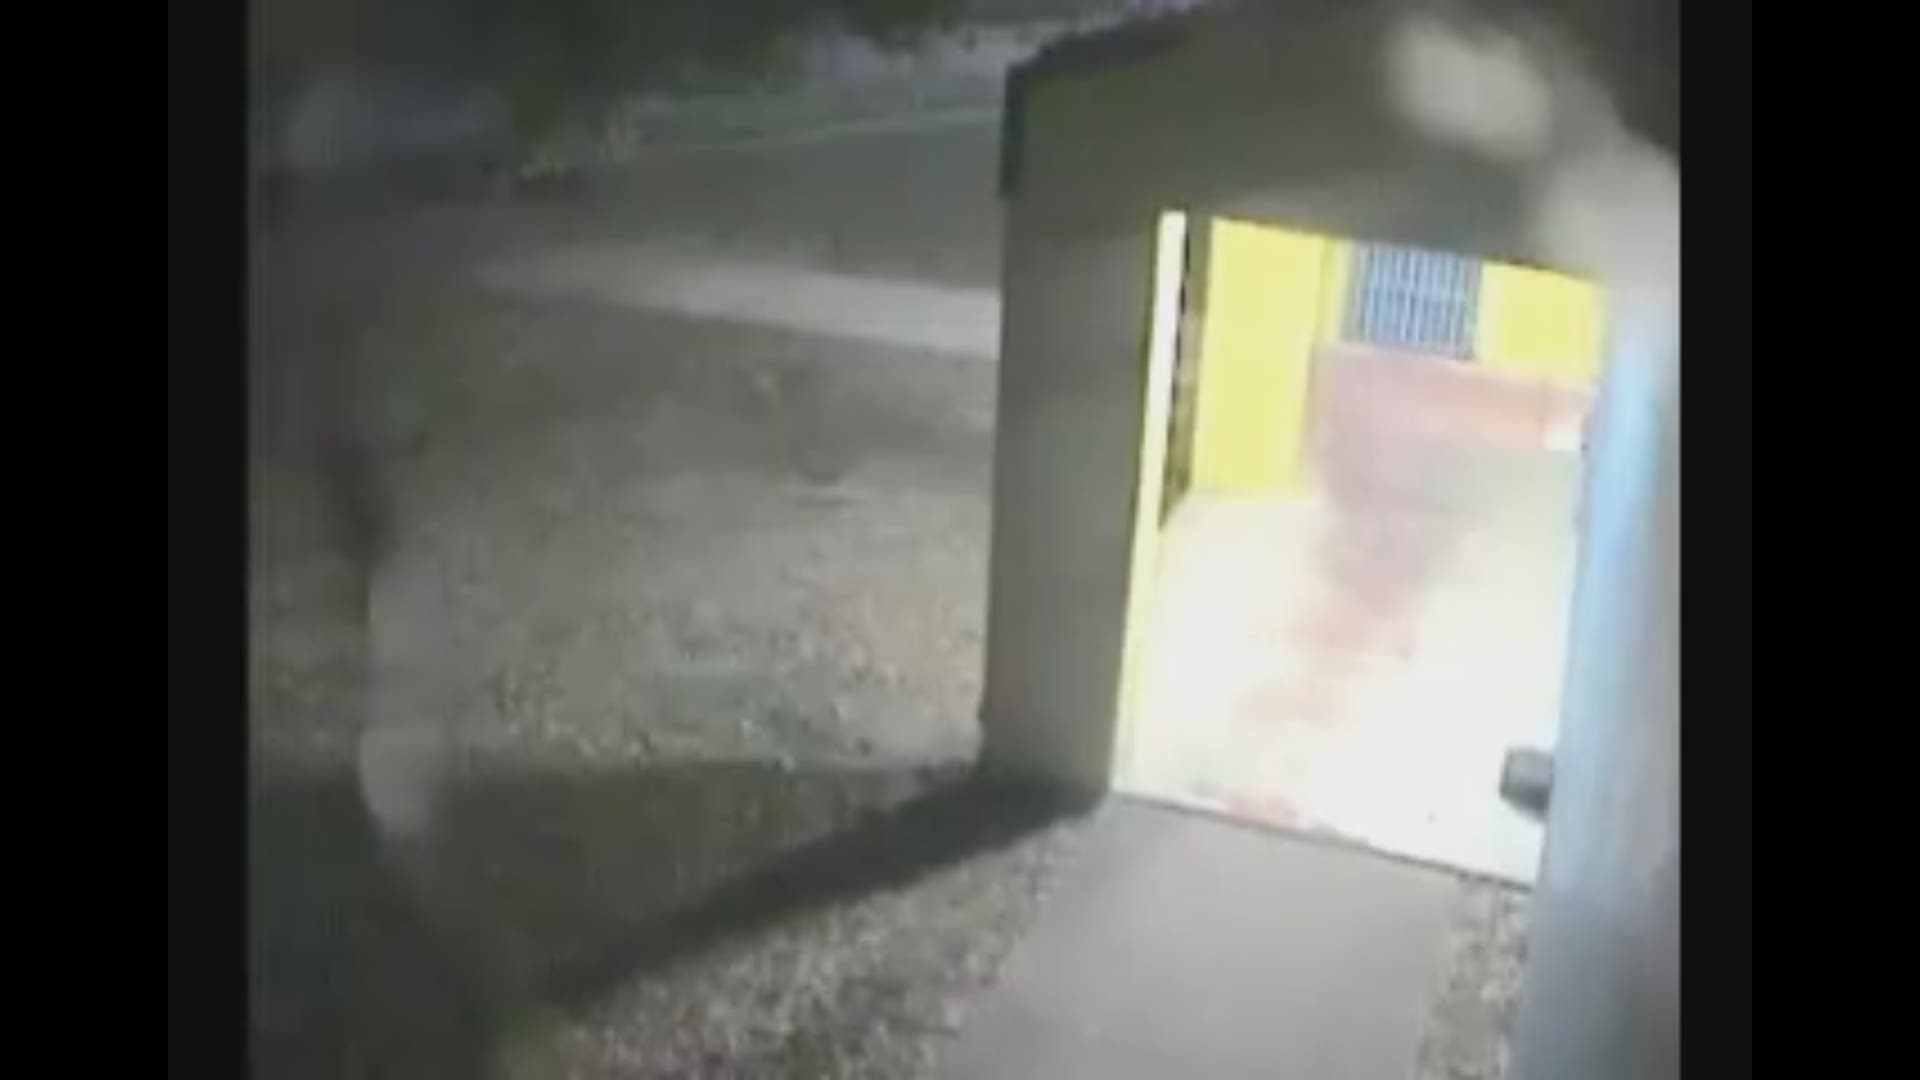 The video is grainy, but Beaumont Police hope someone has information about the two people shown in the footage.